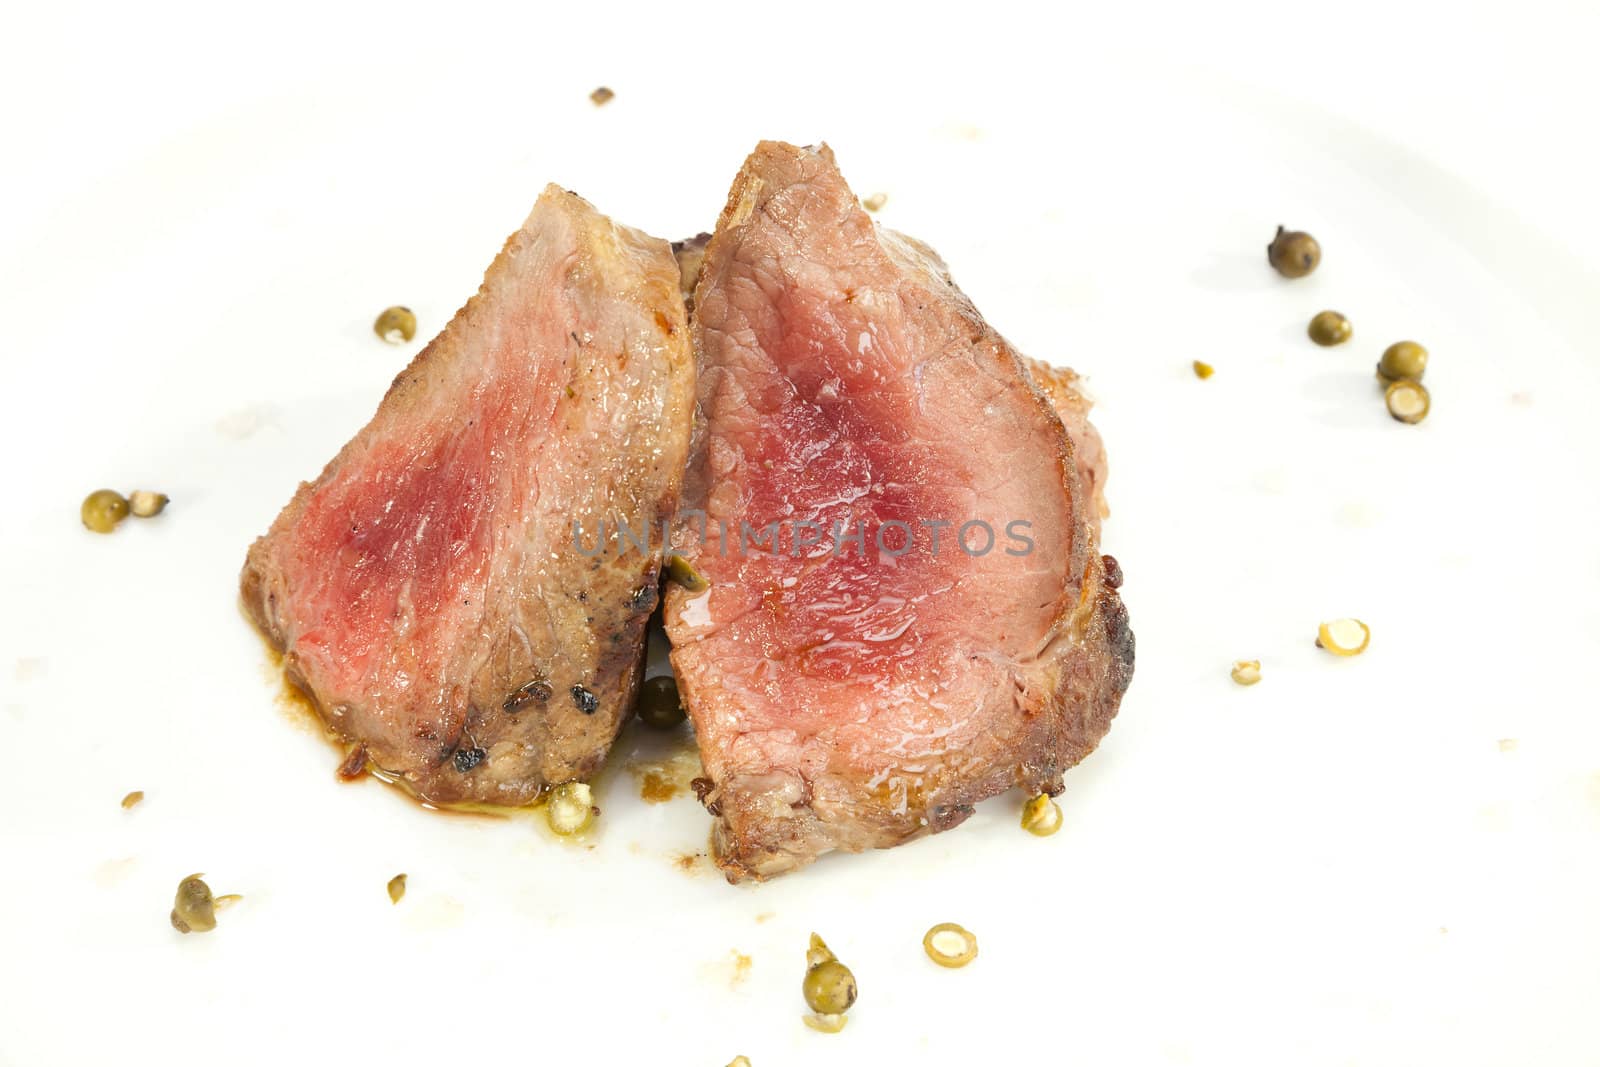 Grilled Sirloin with green pepper